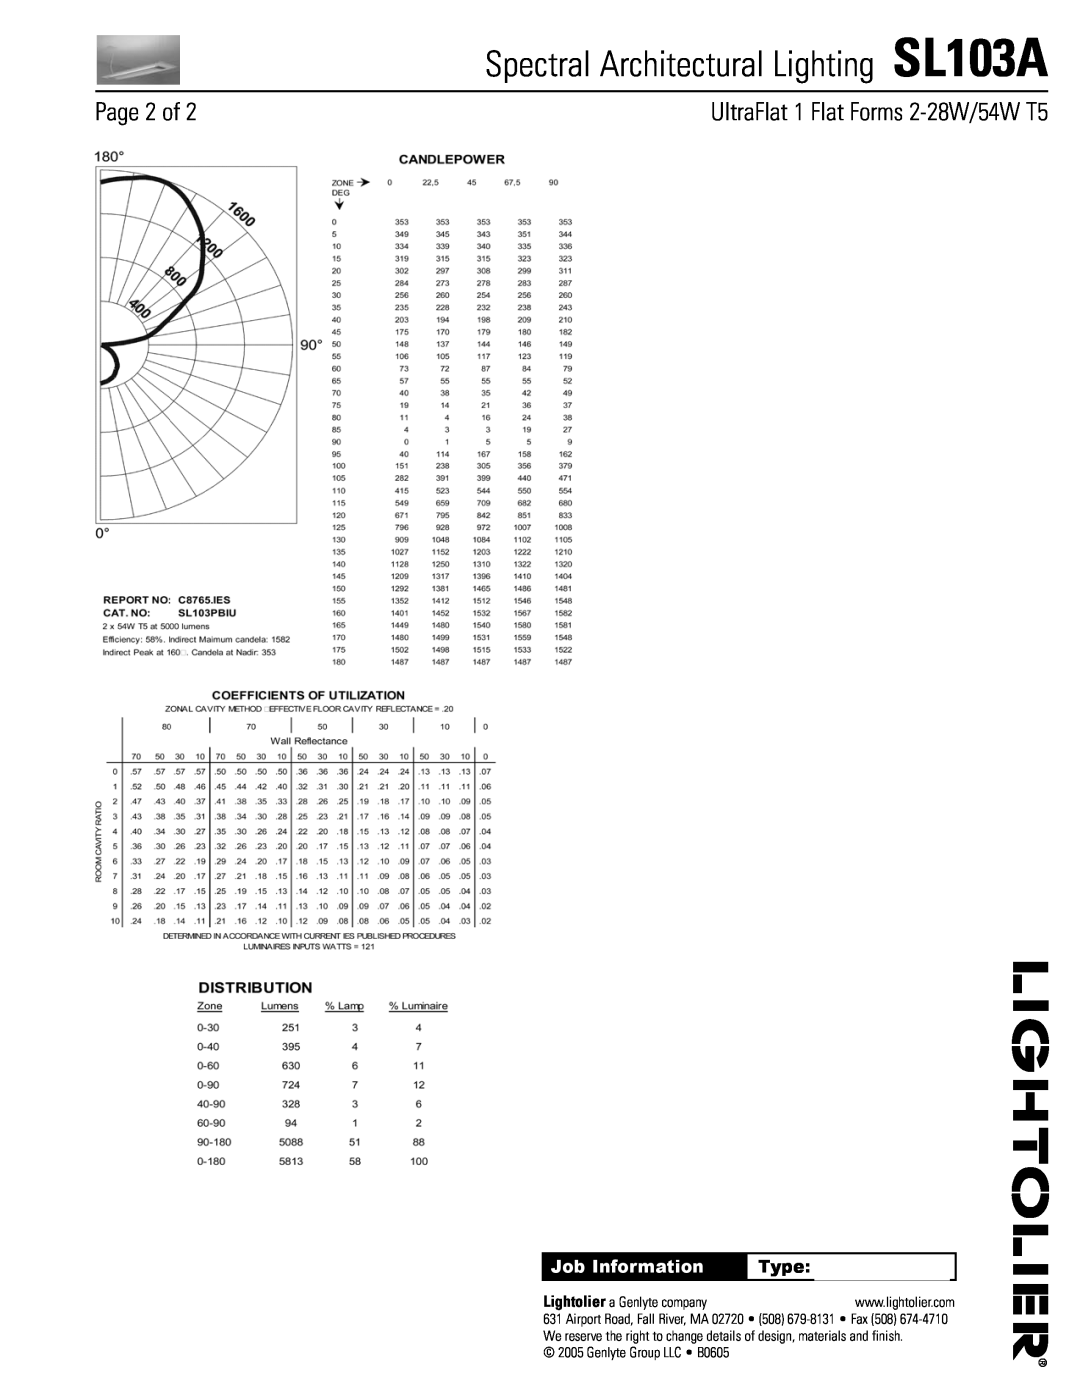 Lightolier Spectral Architectural Lighting SL103A, Page of, UltraFlat 1 Flat Forms 2-28W/54WT5, Job Information, Type 